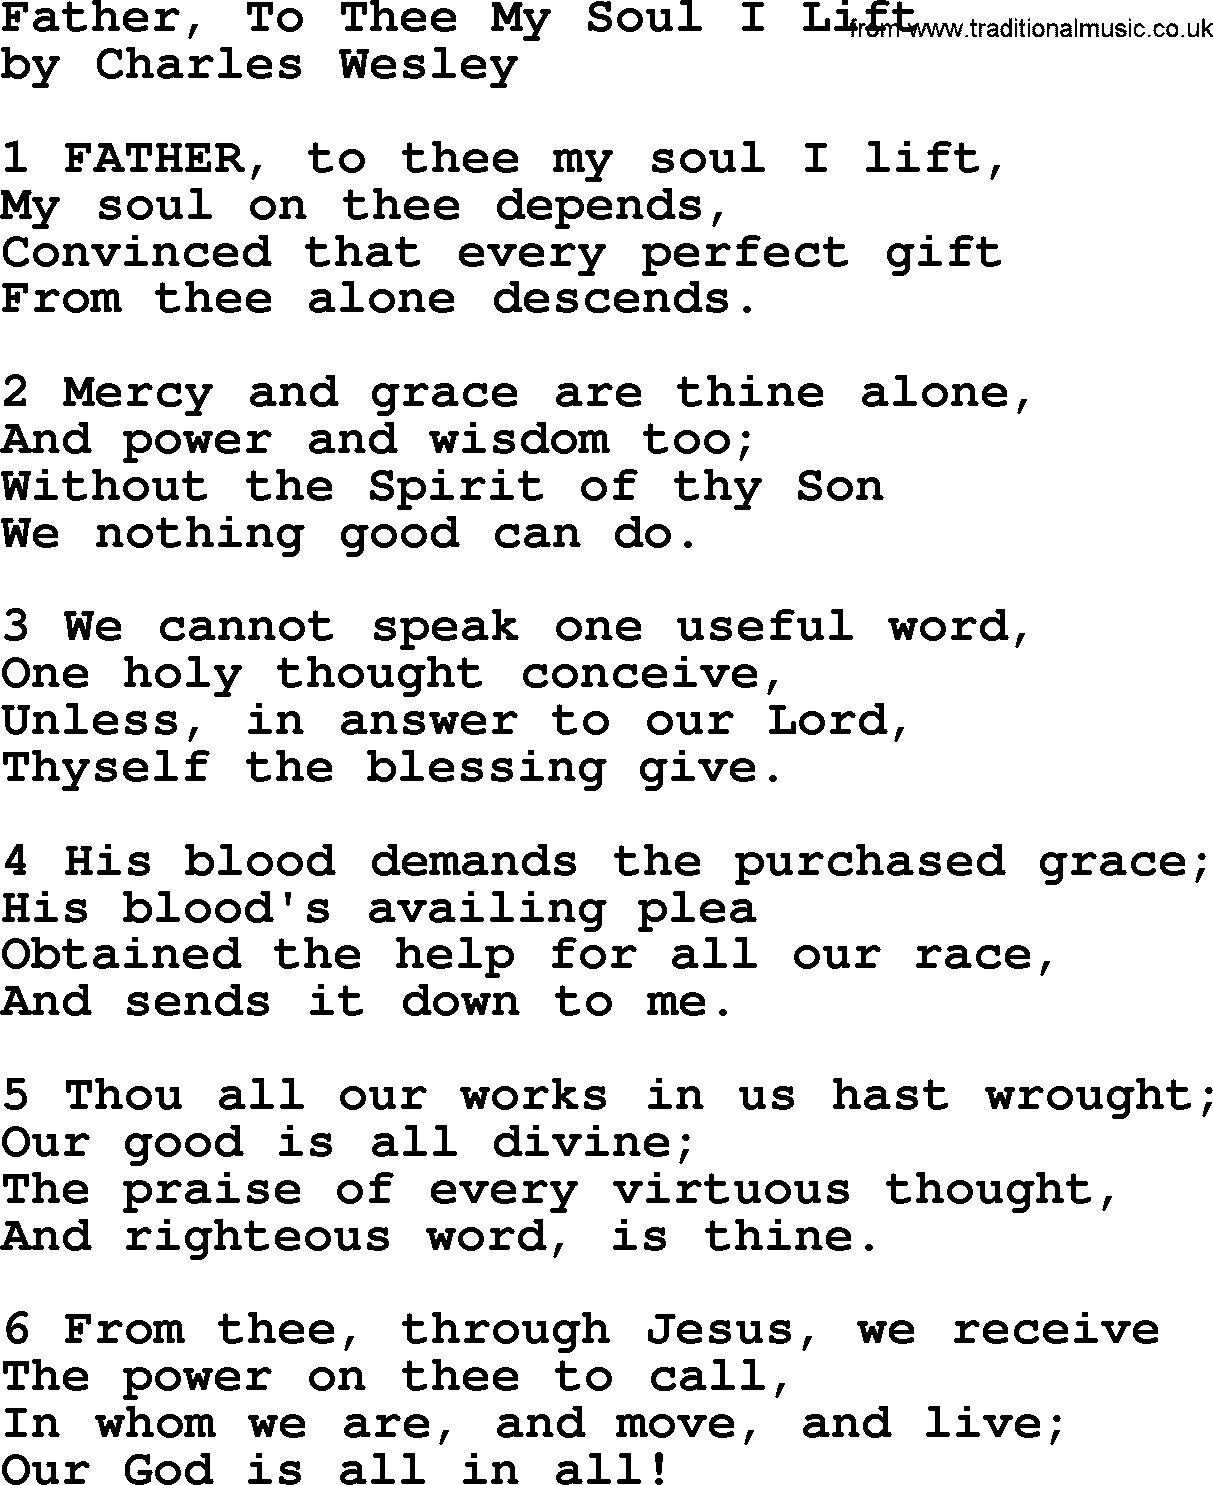 Charles Wesley hymn: Father, To Thee My Soul I Lift, lyrics